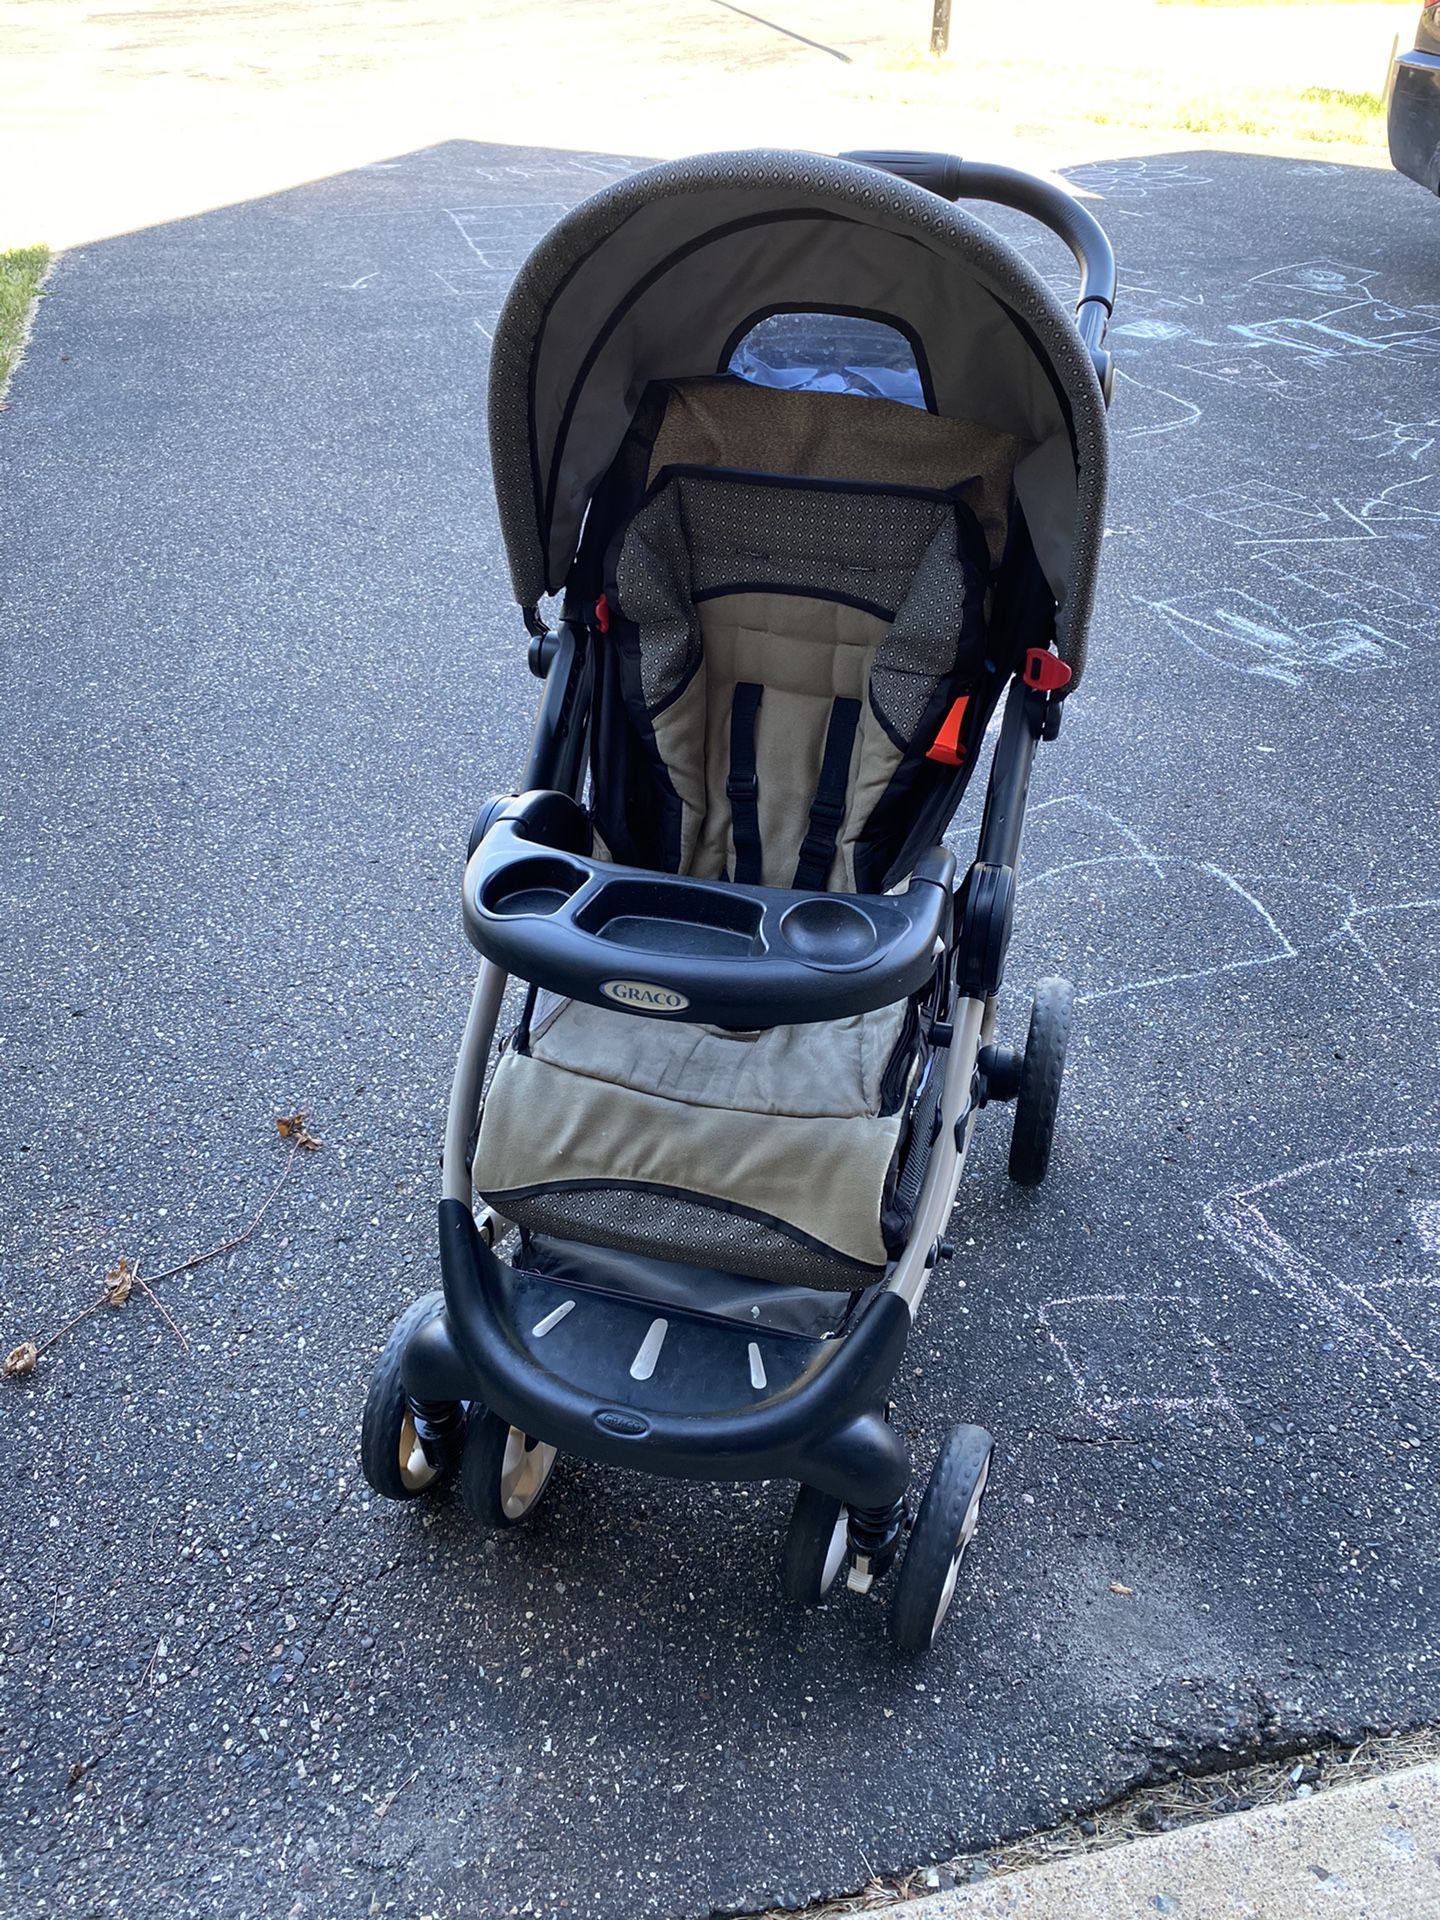 Stroller with matching car seat